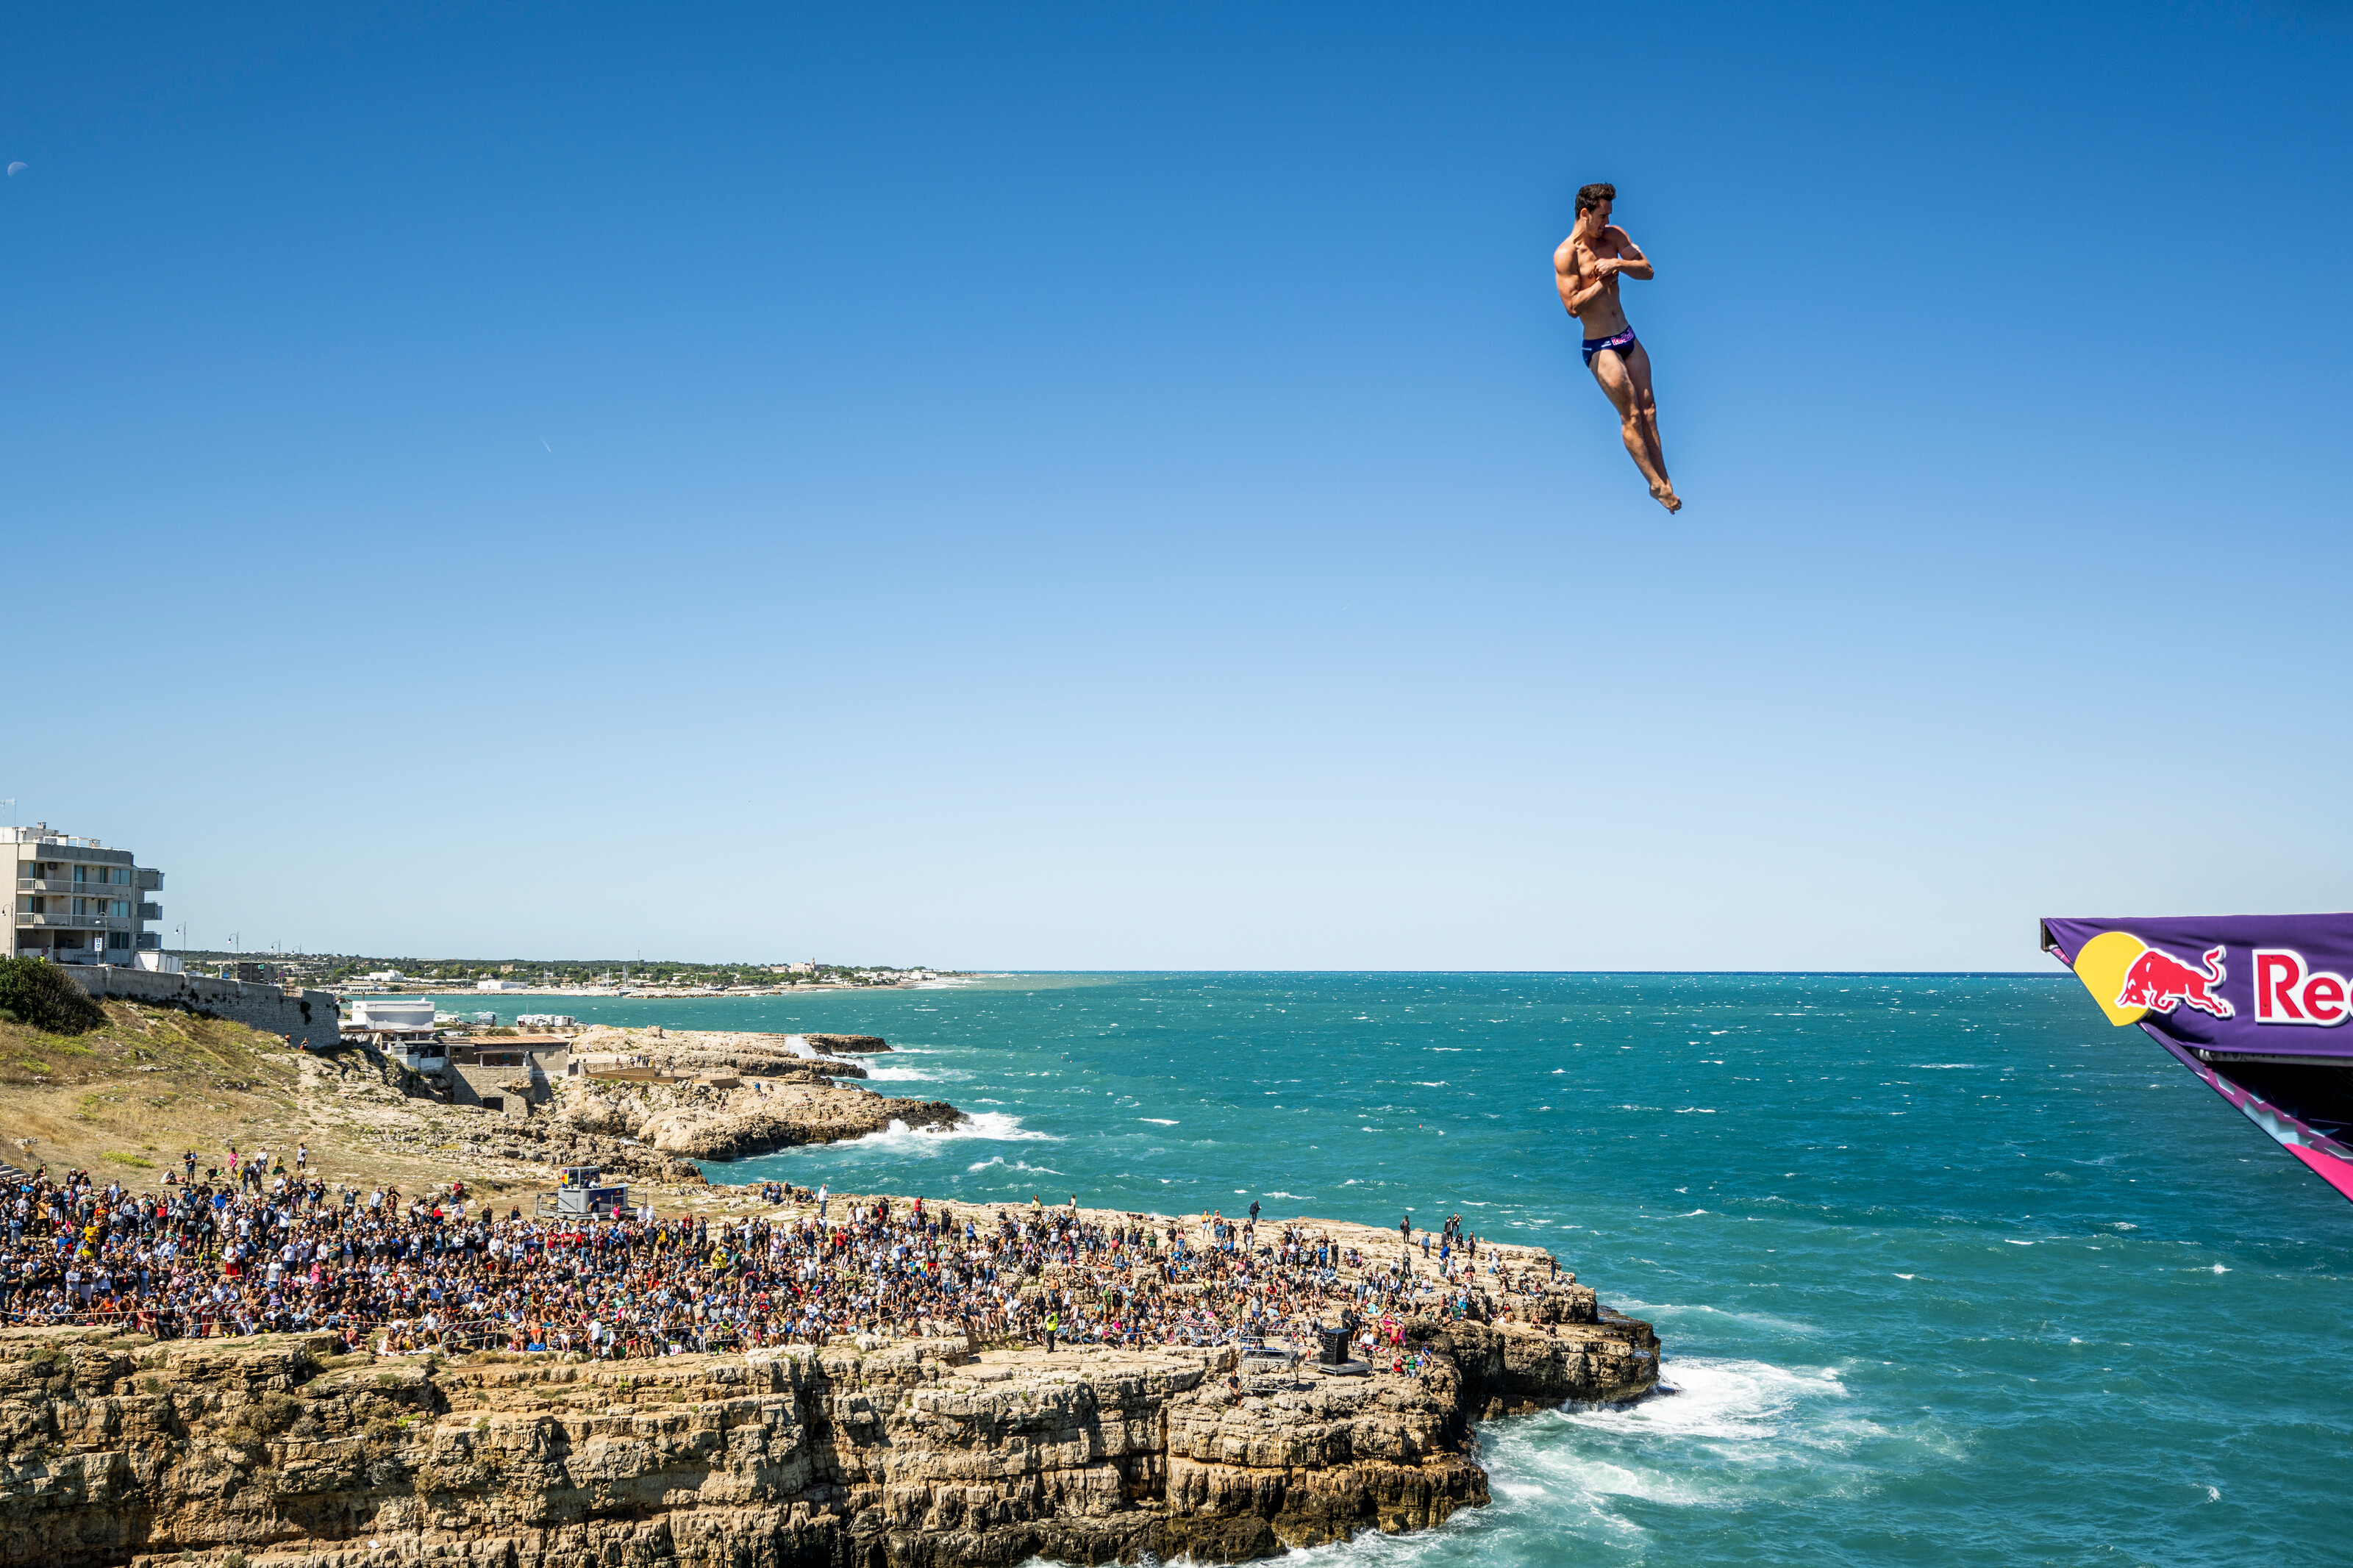 Aidan Heslop dives from the 28 meter platform during the final competition day of the seventh stop of the Red Bull Cliff Diving World Series at Polignano a Mare, Italy. 